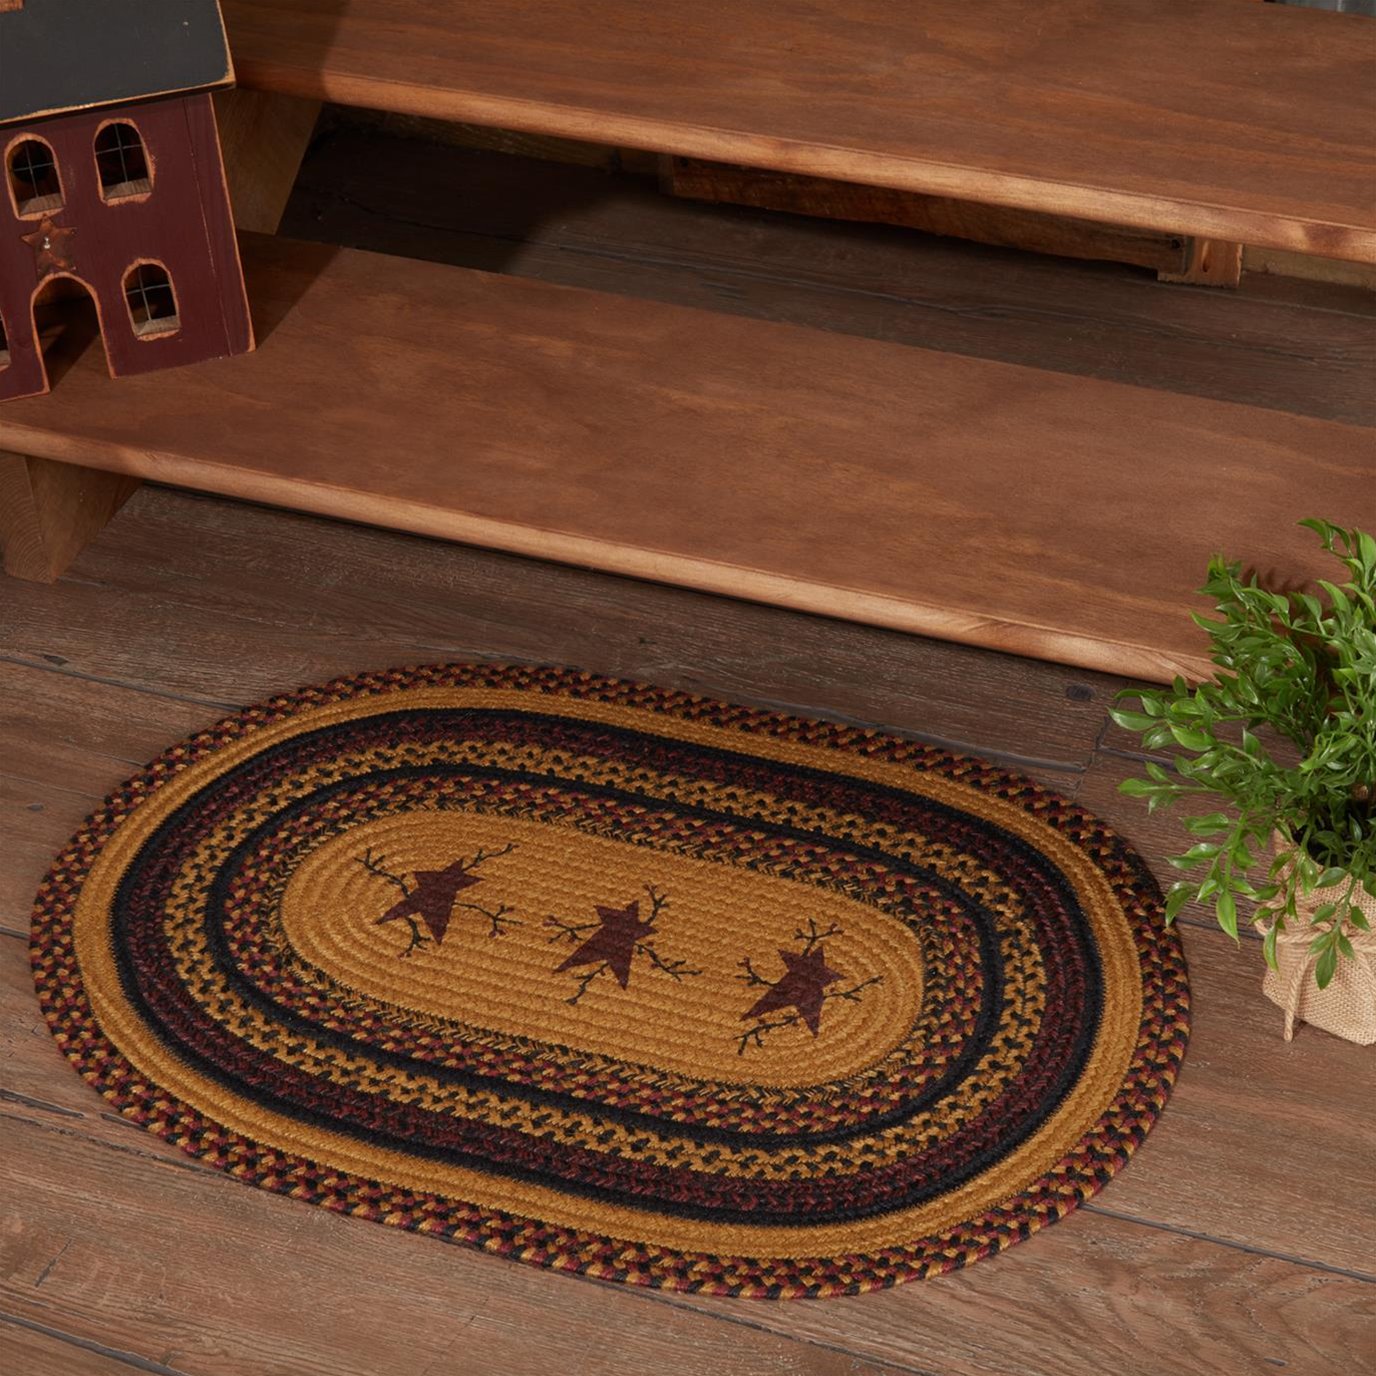 Heritage Farms Star and Pip Jute Rug Oval w/ Pad 20x30